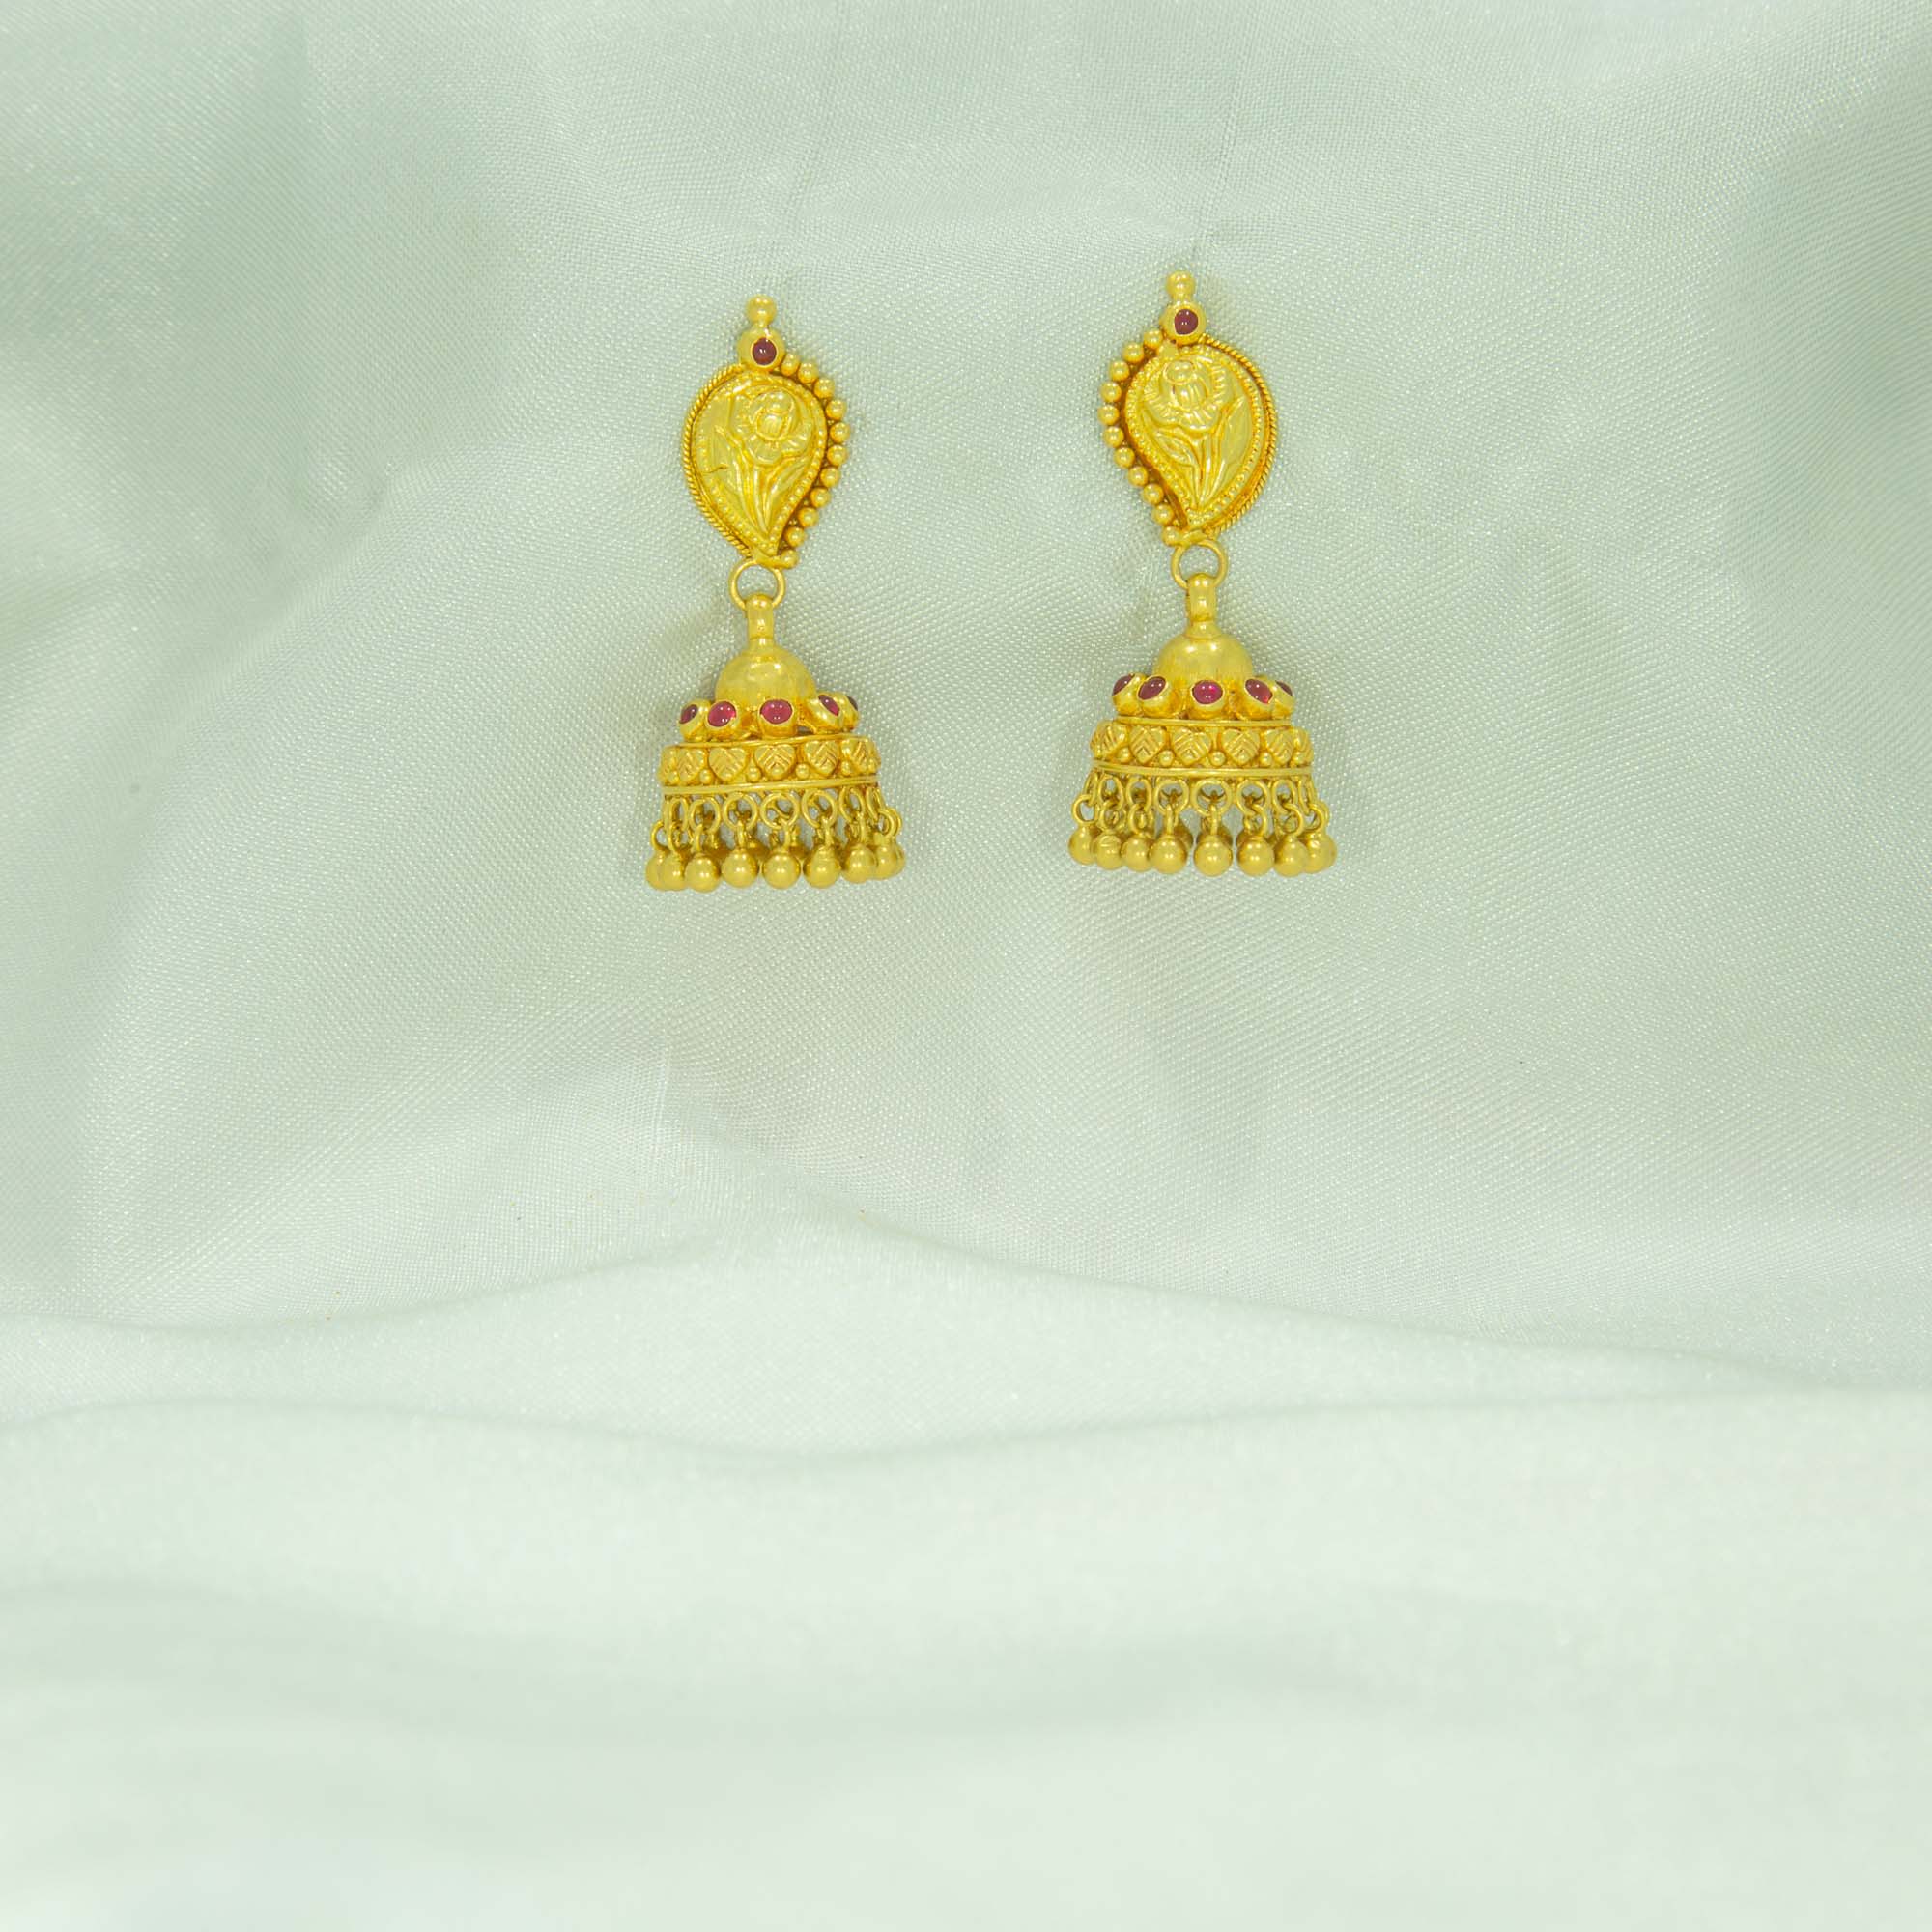 Buy quality Simple 22kt gold earrings design in Pune